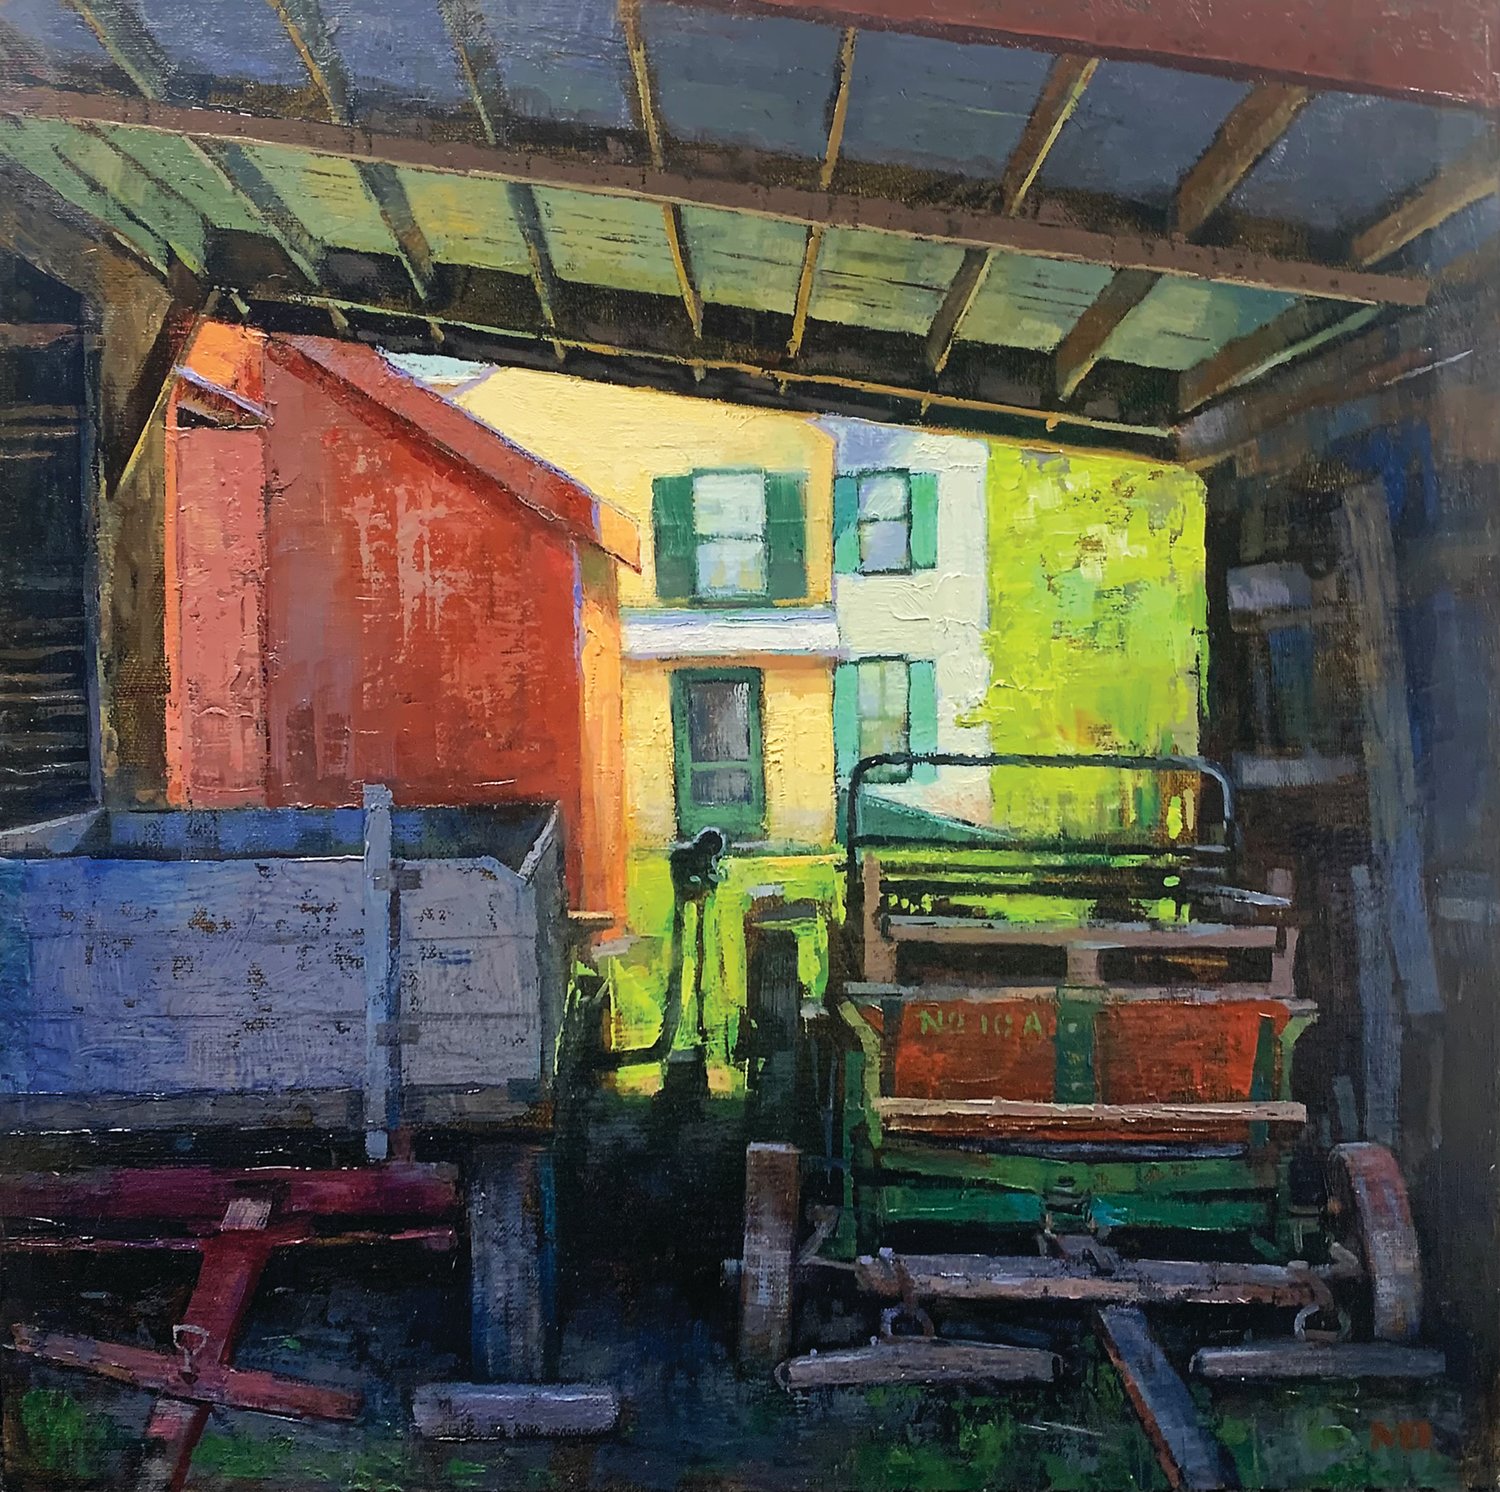 Among several plein air works that will be auctioned to benefit the Lambertville Historical Society and the James Marshall House Museum is this work, “Under Cover” by Matt Deprospero. View all works by participating artists at LambertvilleHistoricalSociety.org.